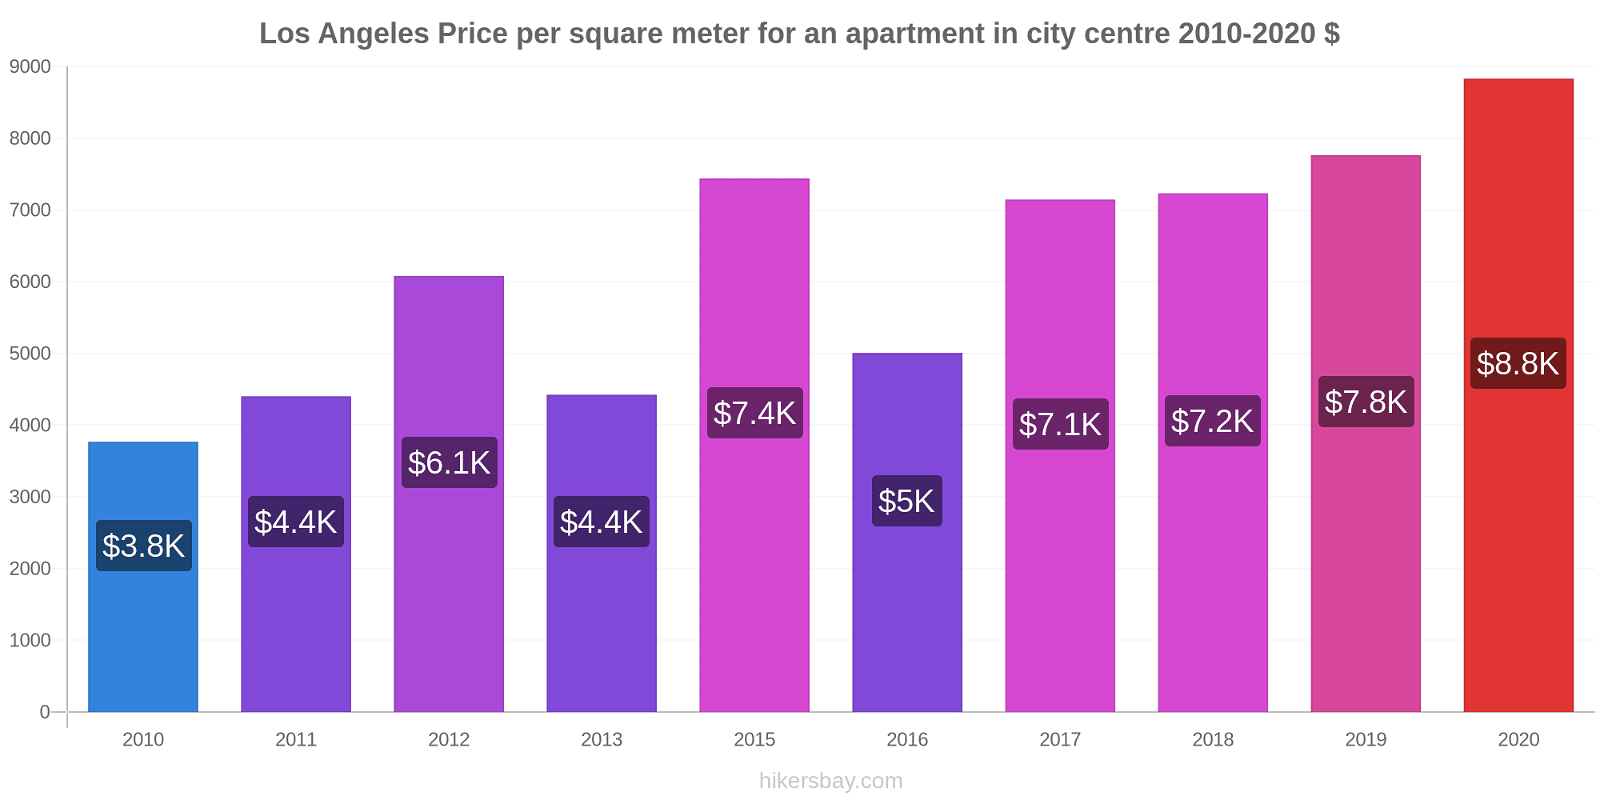 Los Angeles price changes Price per square meter for an apartment in city centre hikersbay.com